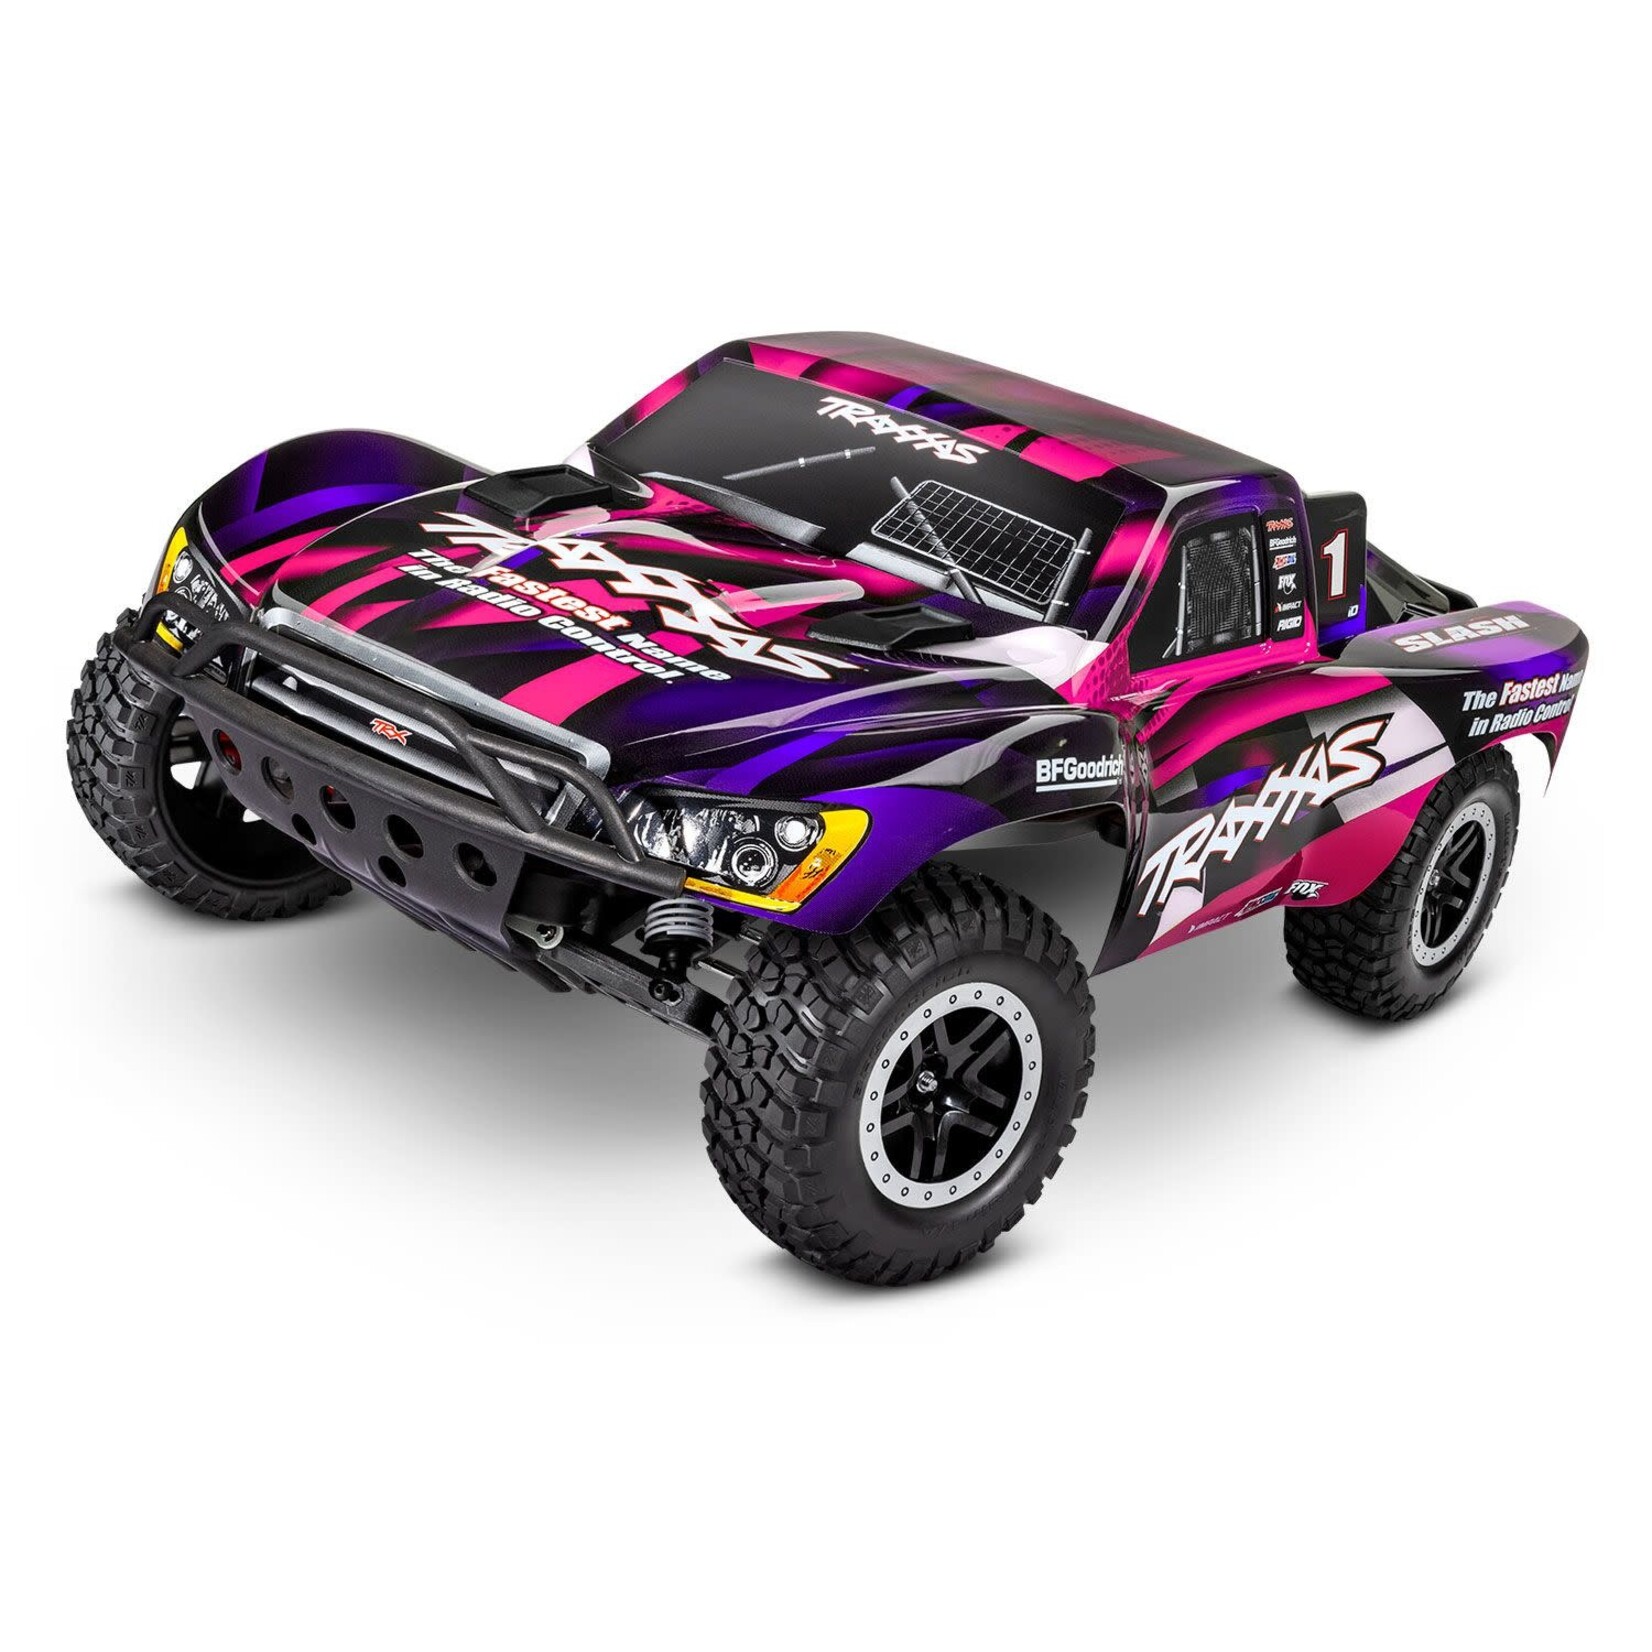 Traxxas Slash 1/10-Scale 2WD Short Course Racing Truck - PINK